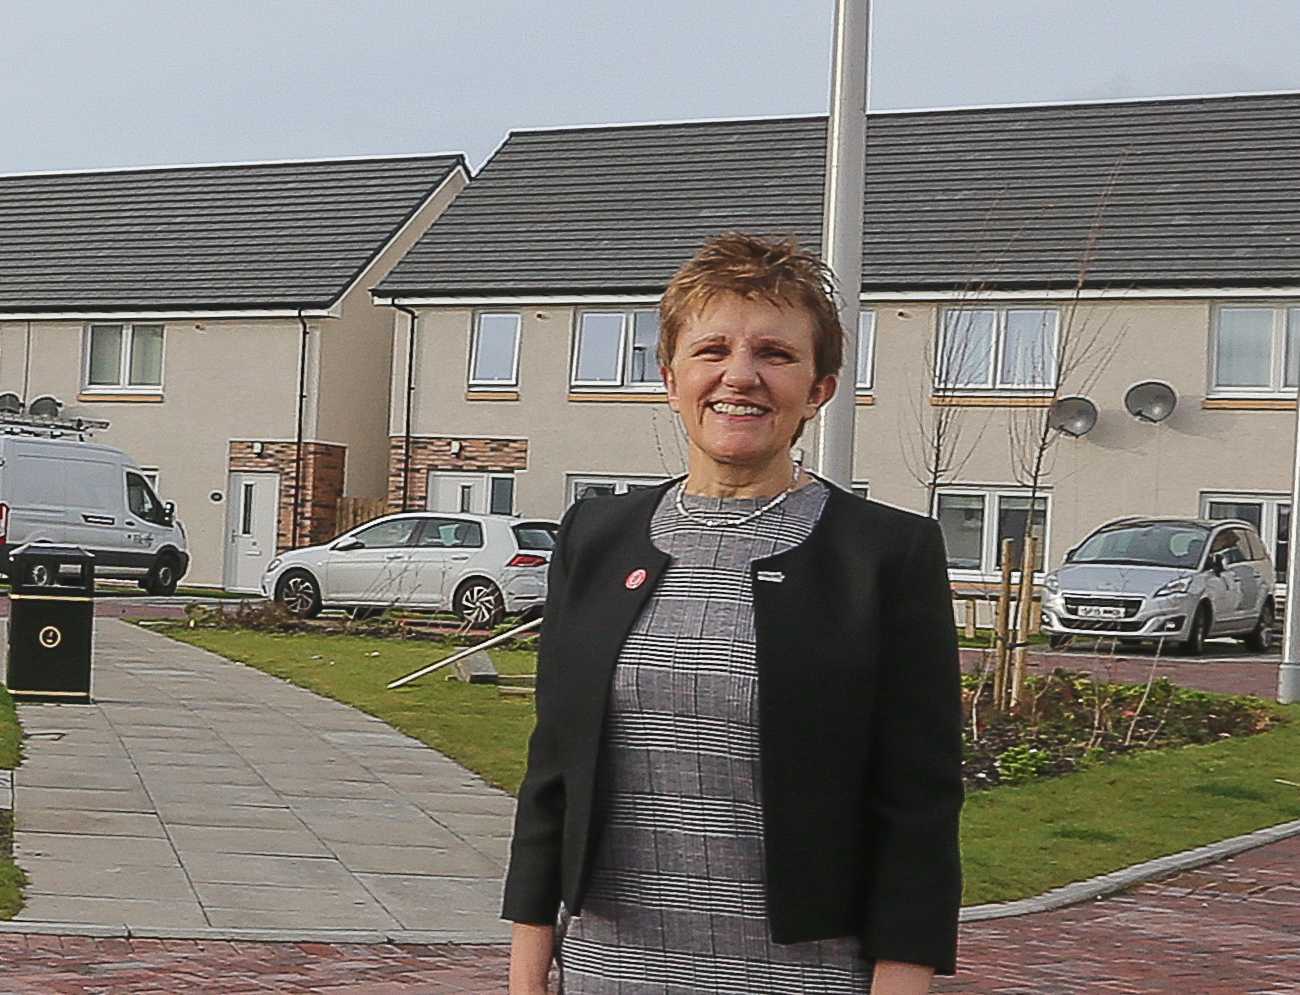 25 new council homes completed in Methil